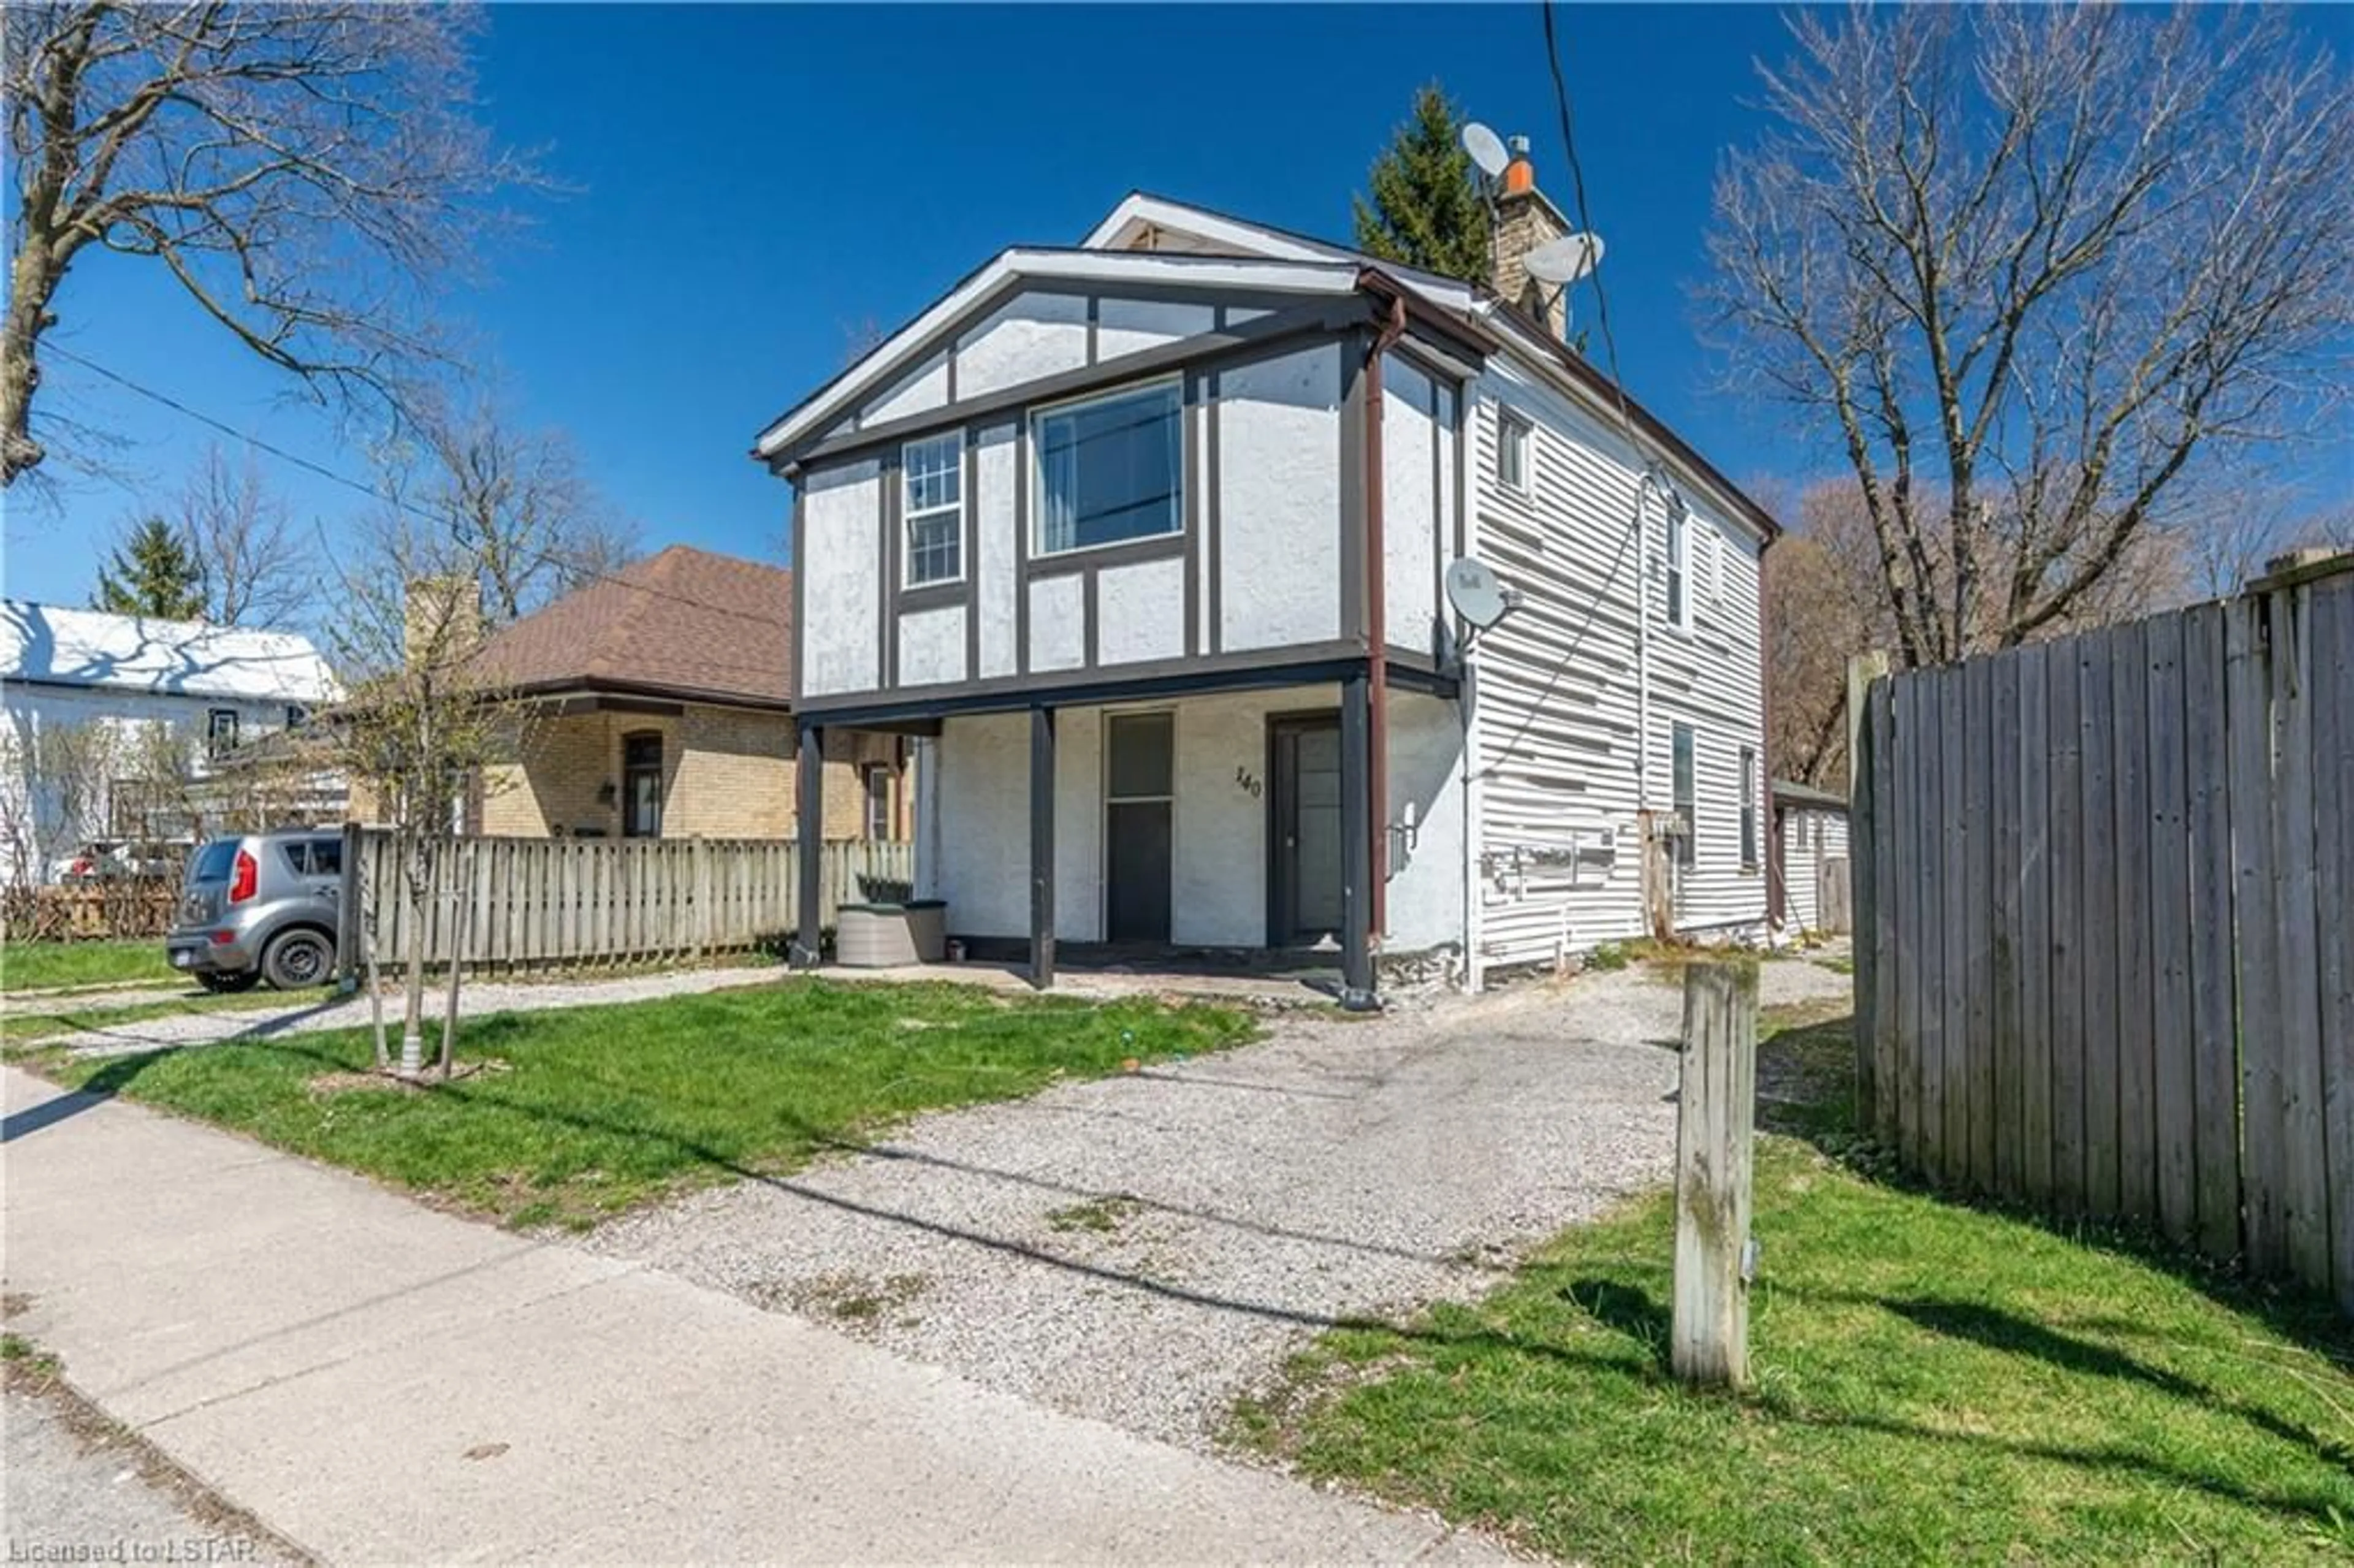 Frontside or backside of a home for 140 Rectory St, London Ontario N5Z 2A3